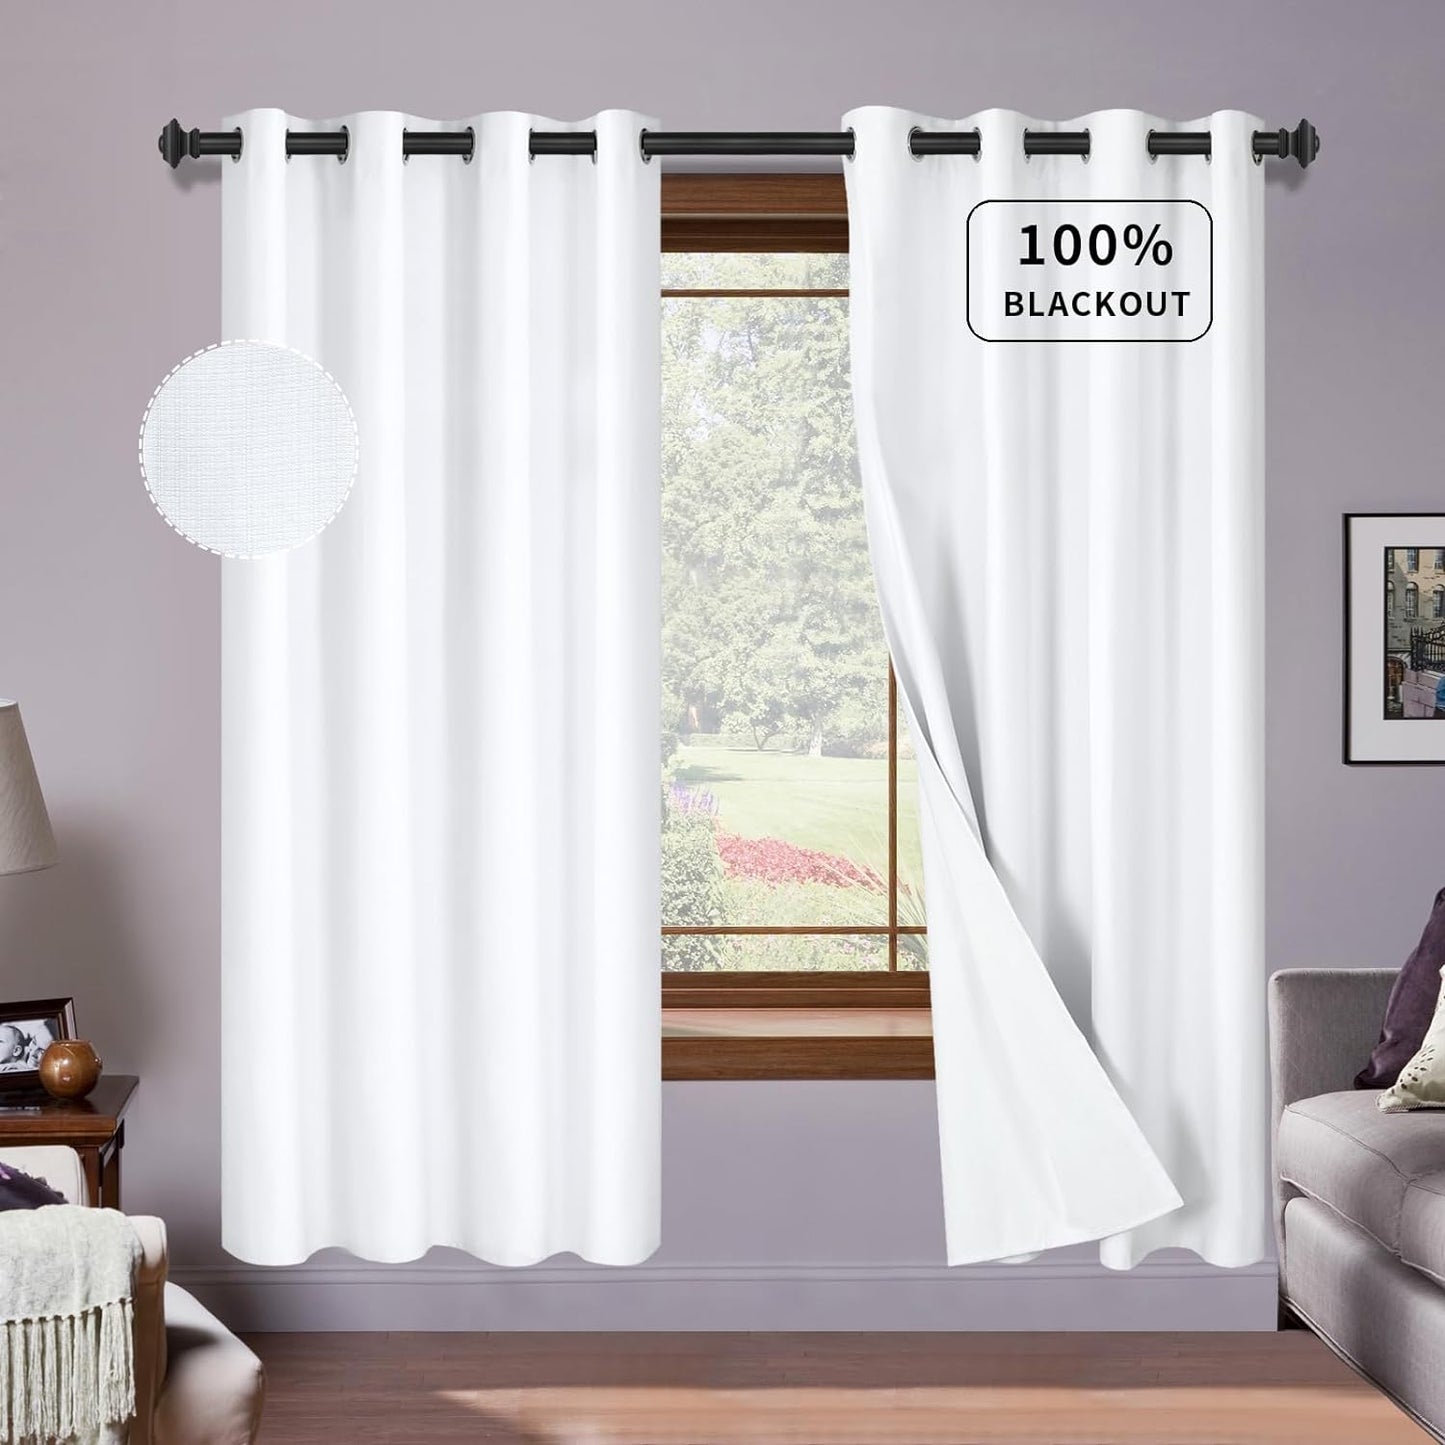 Purefit White Linen Blackout Curtains 84 Inches Long 100% Room Darkening Thermal Insulated Window Curtain Drapes for Bedroom Living Room Nursery with Anti-Rust Grommets & Energy Saving Liner, 2 Panels  PureFit White 52"W X 72"L 